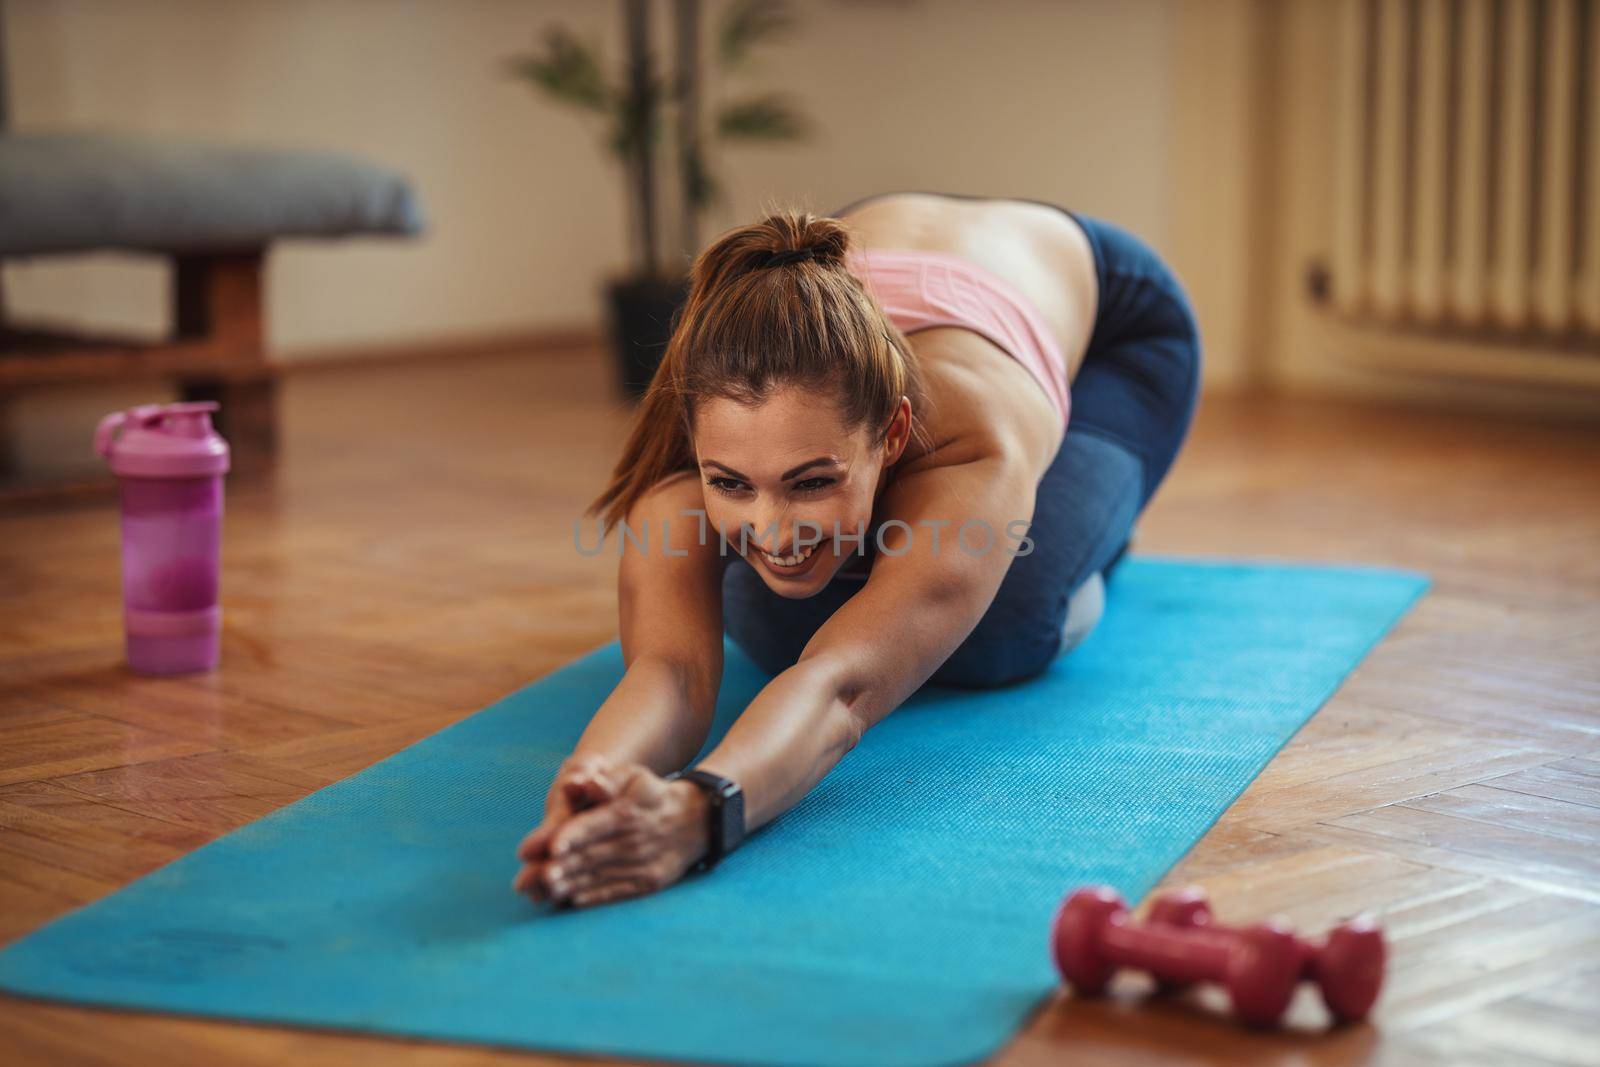 Young smiling woman is doing stretching exercises in the living room on floor mat at home in morning sunshine.